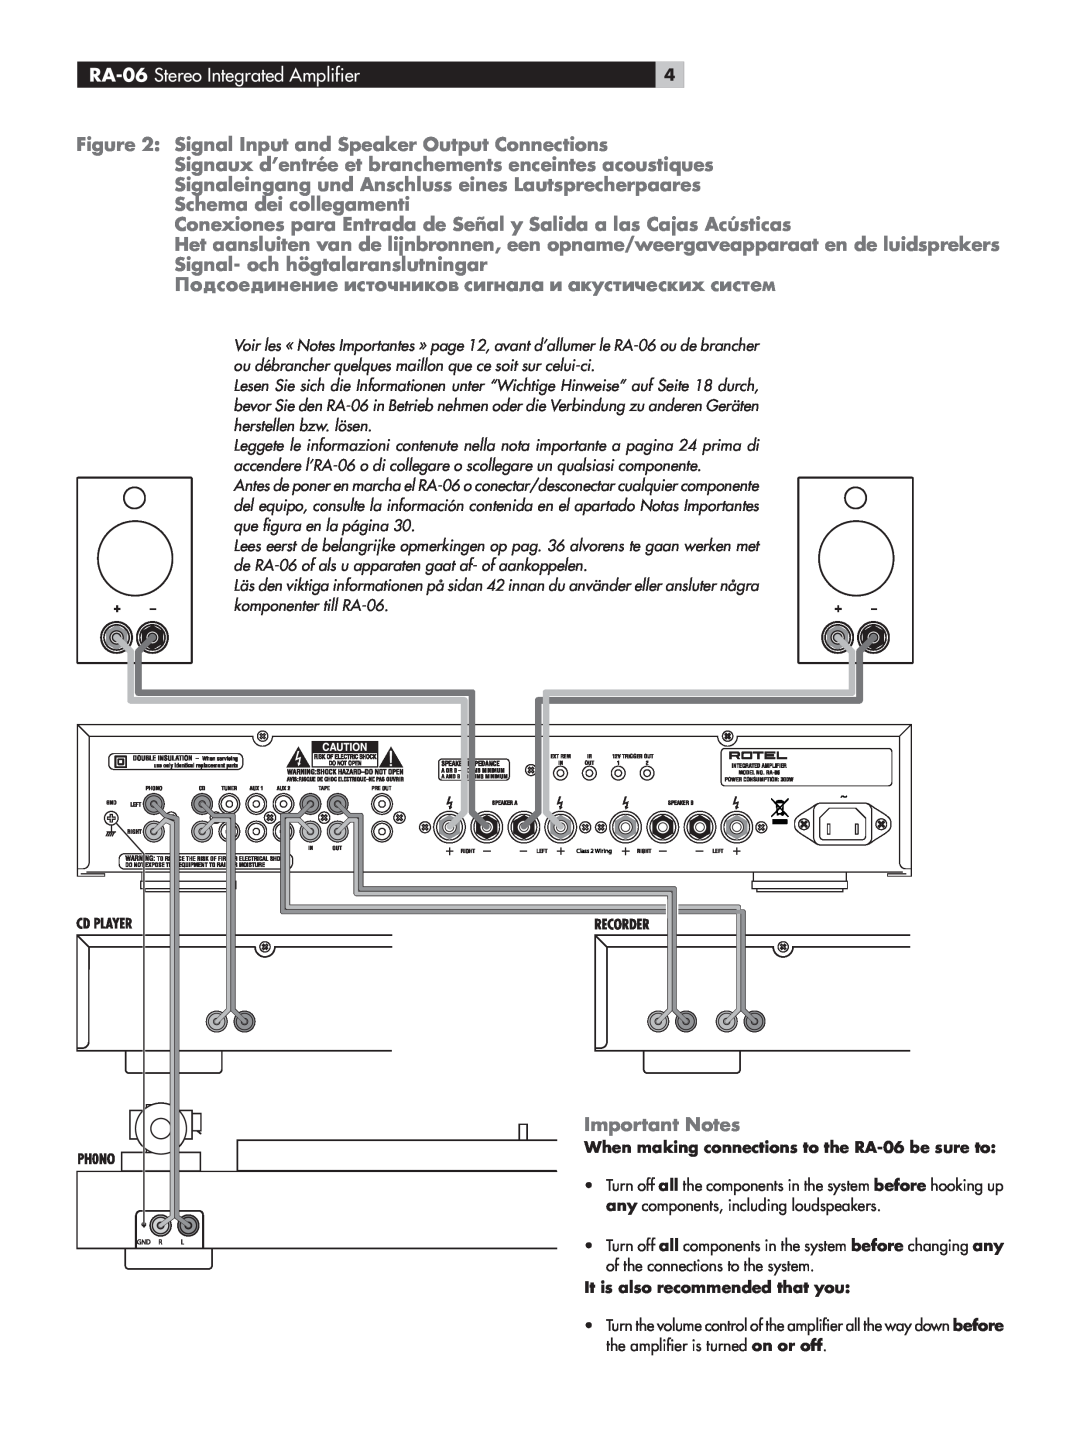 Rotel owner manual RA-06 Stereo Integrated Amplifier, Important Notes 